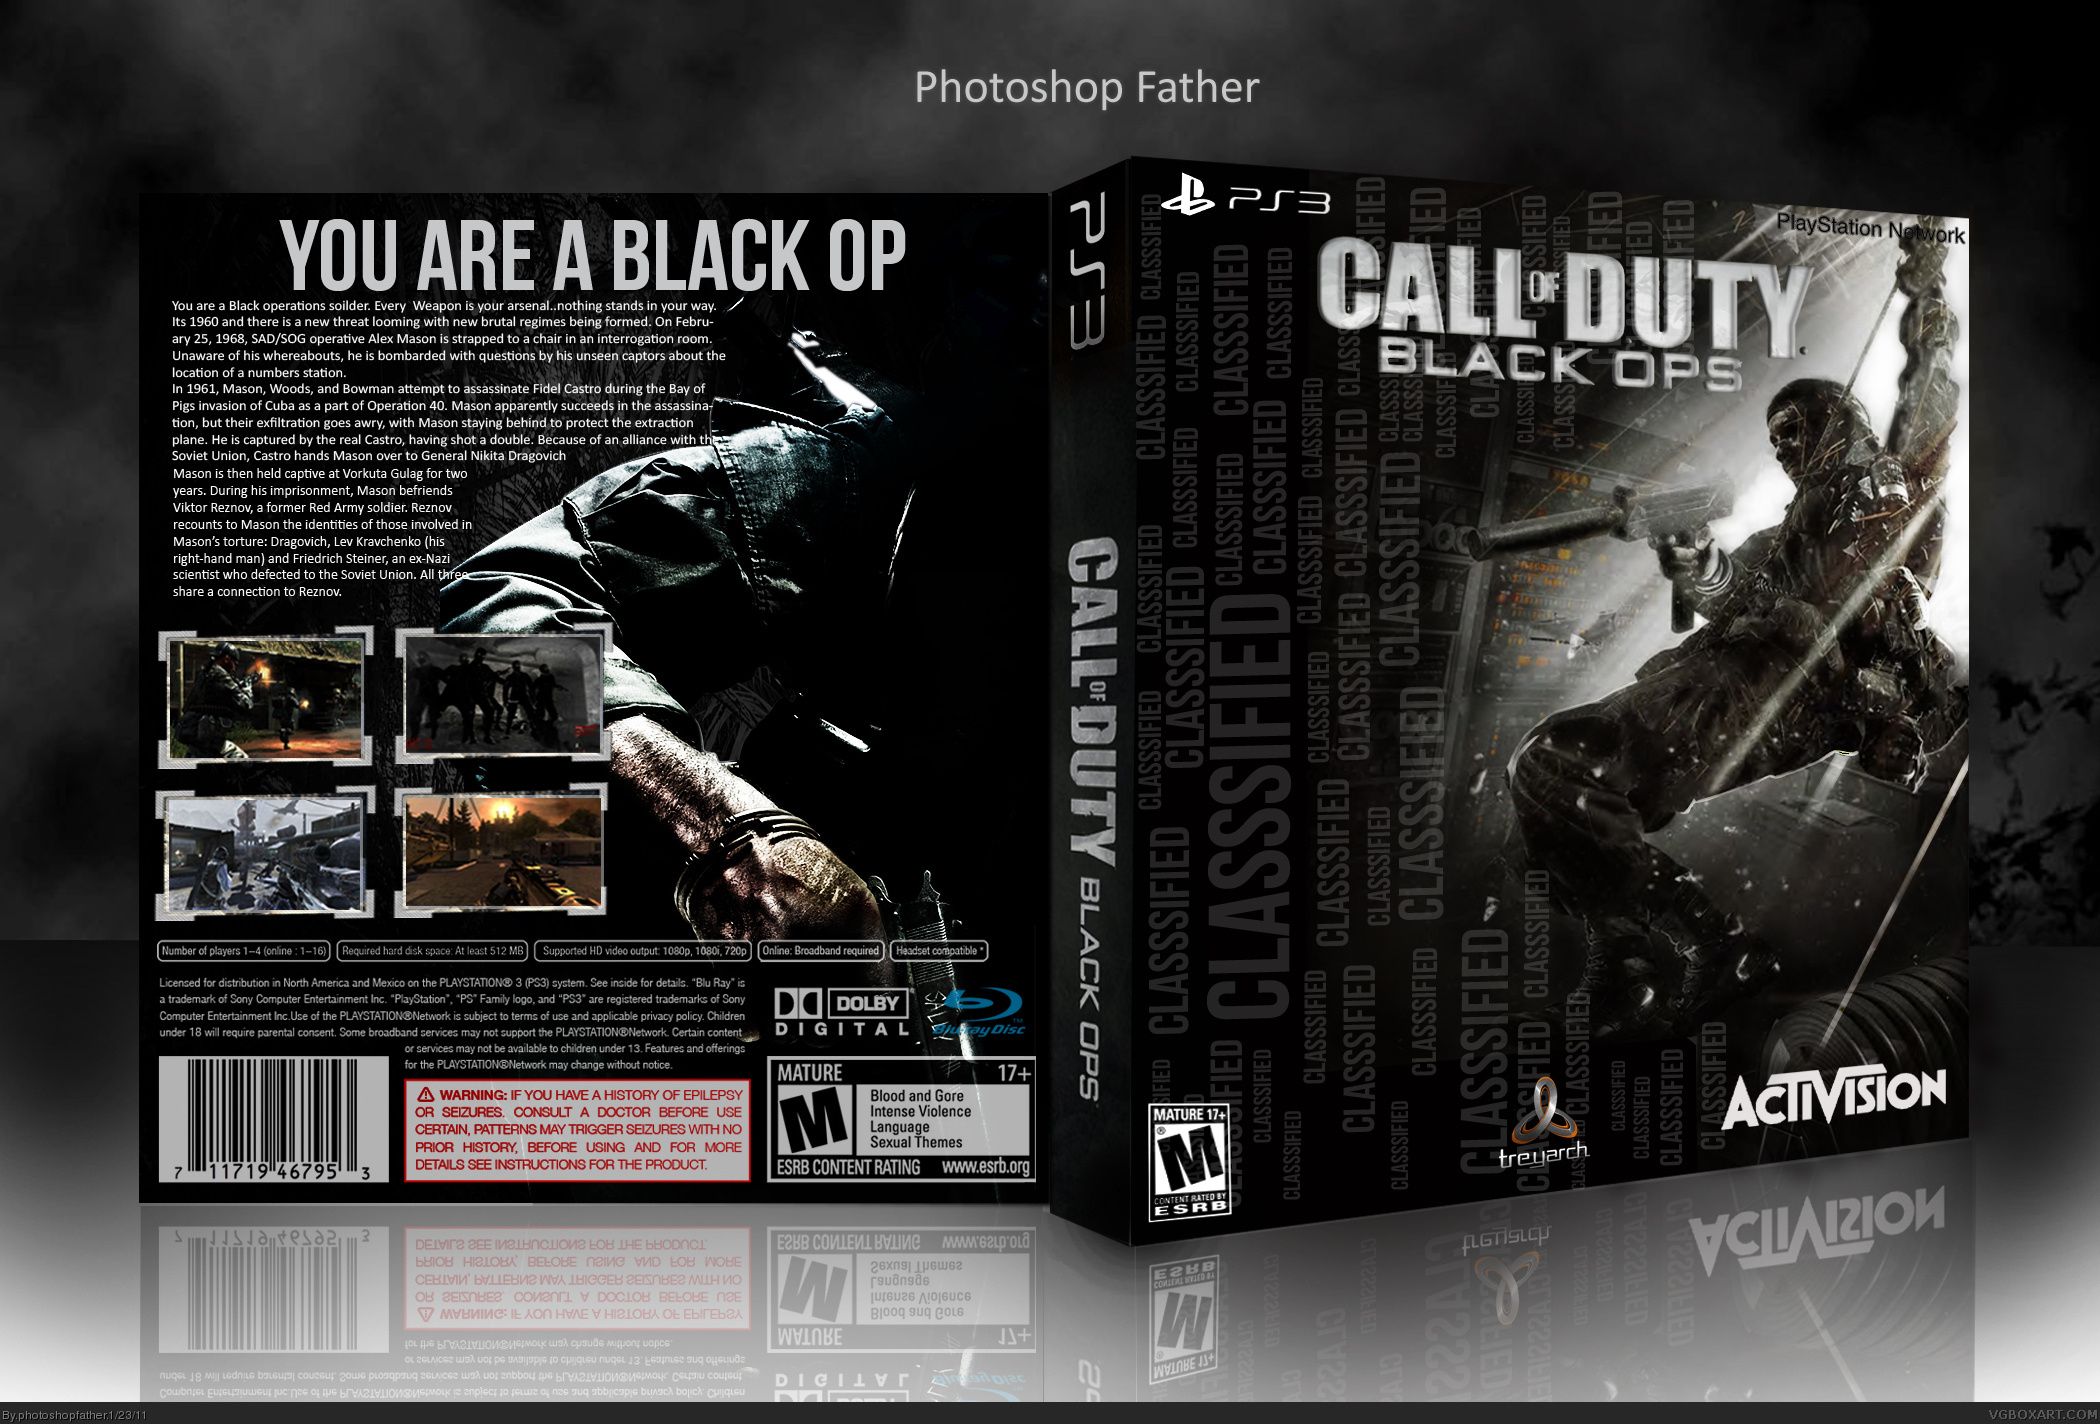 Call Of Duty Black Ops box cover